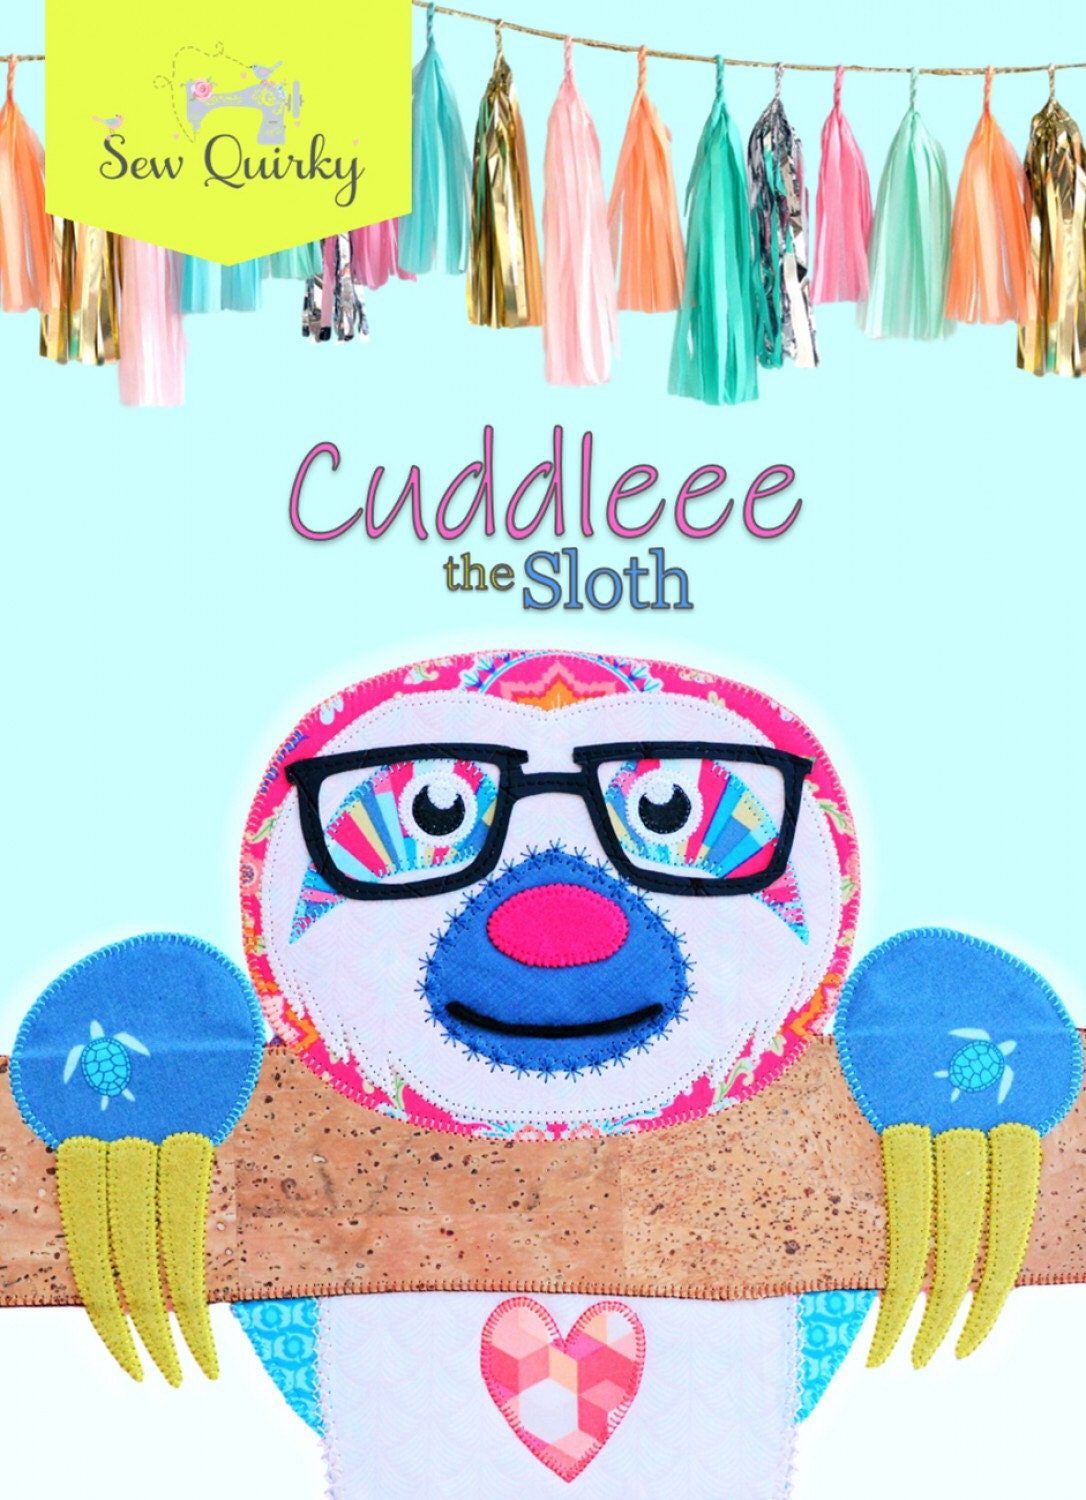 Cuddleee the Sloth - Sew Quirky - Mandy Murray - Appliqué Pattern - Mini Quilt Pattern